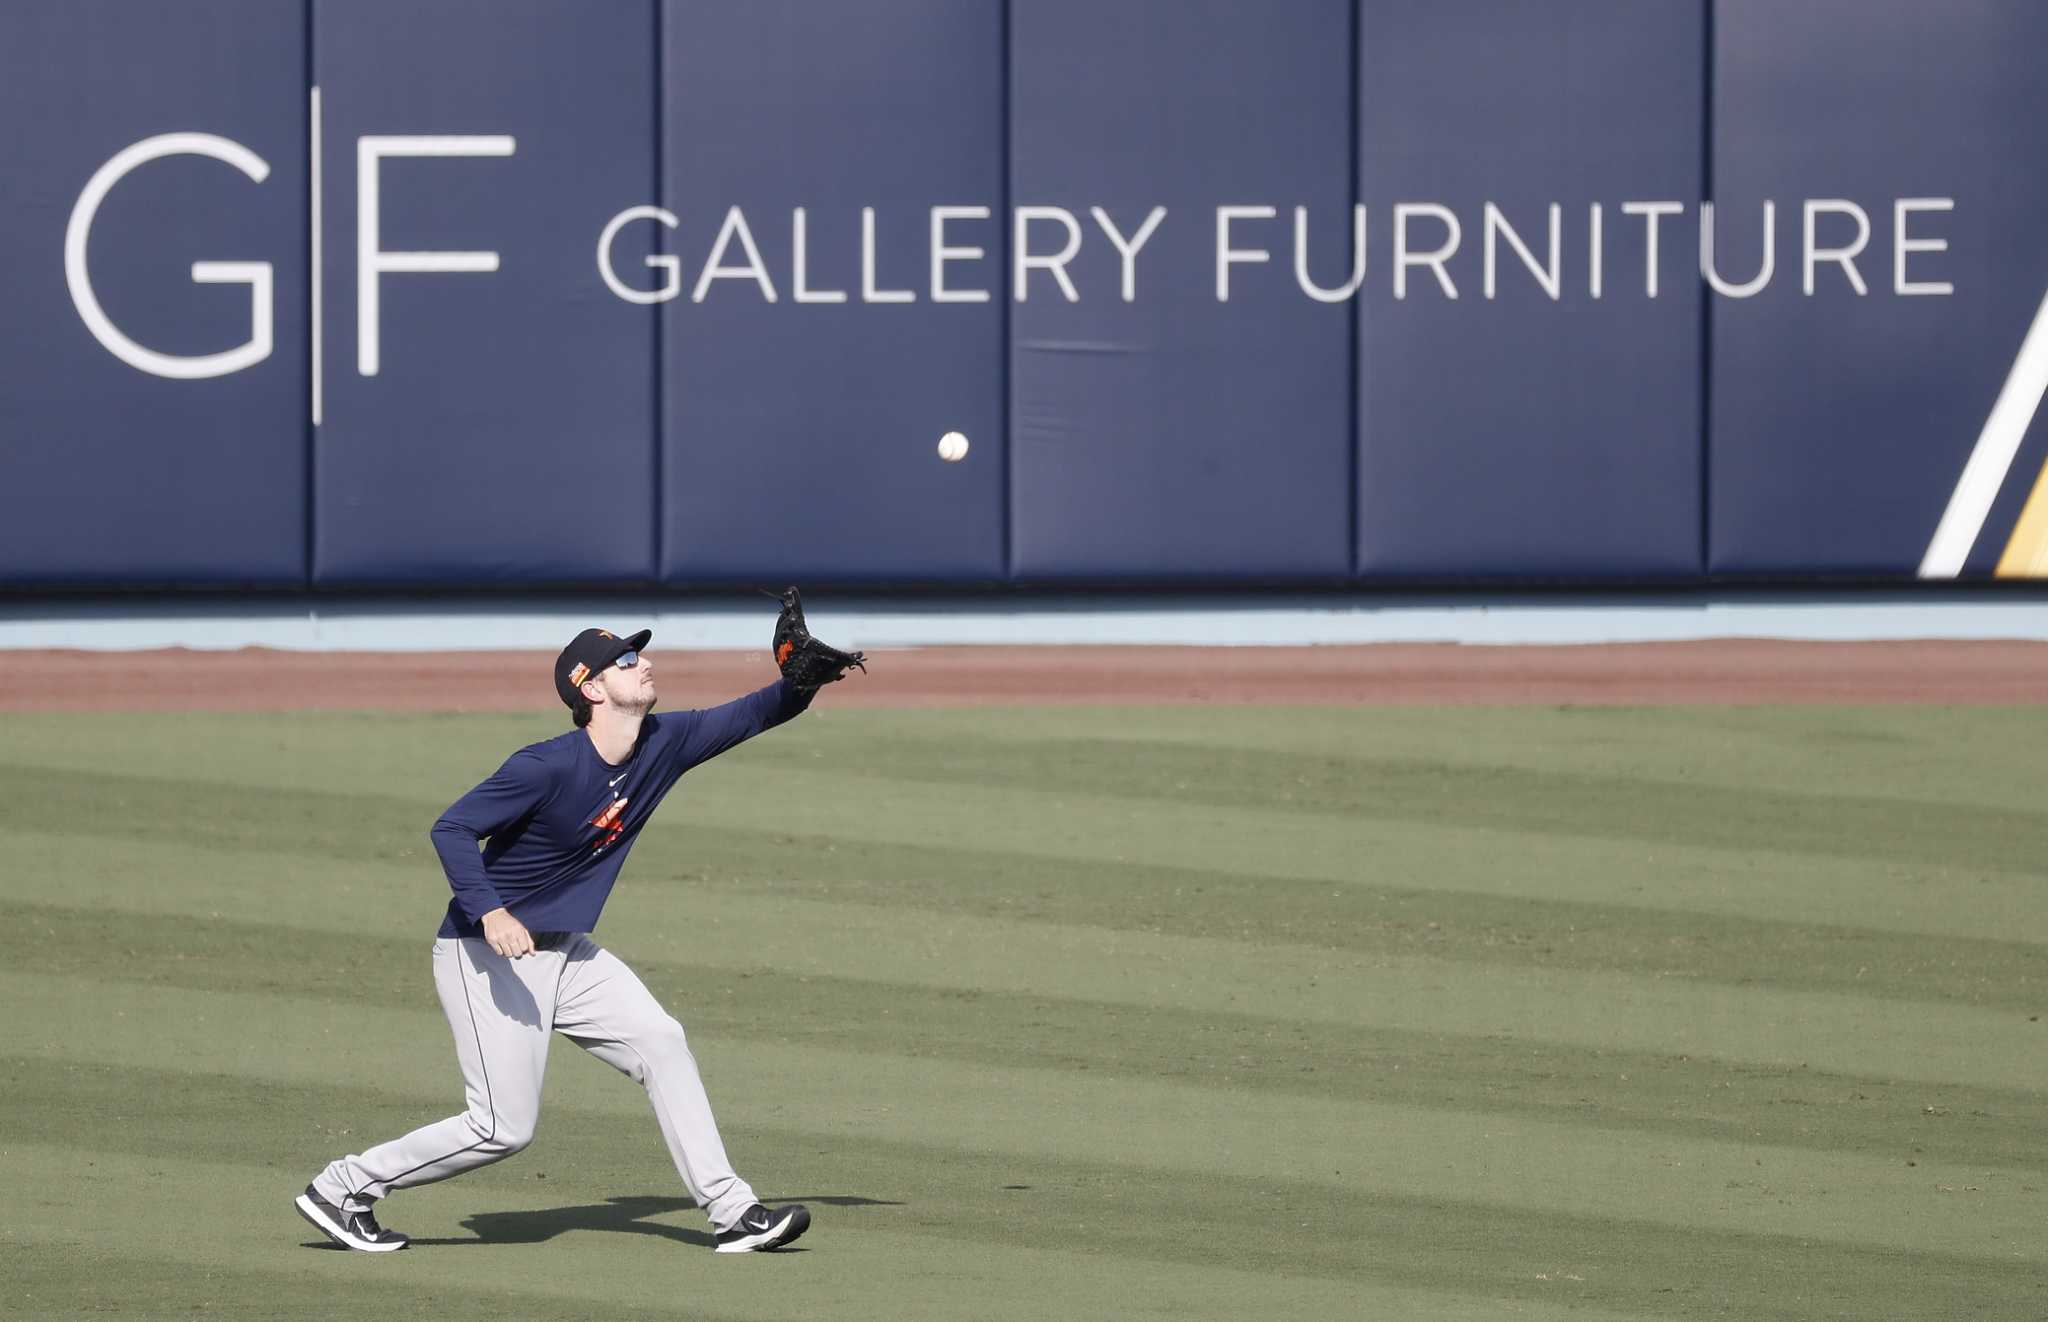 Gallery Furniture backs Astros with free mattress promotion